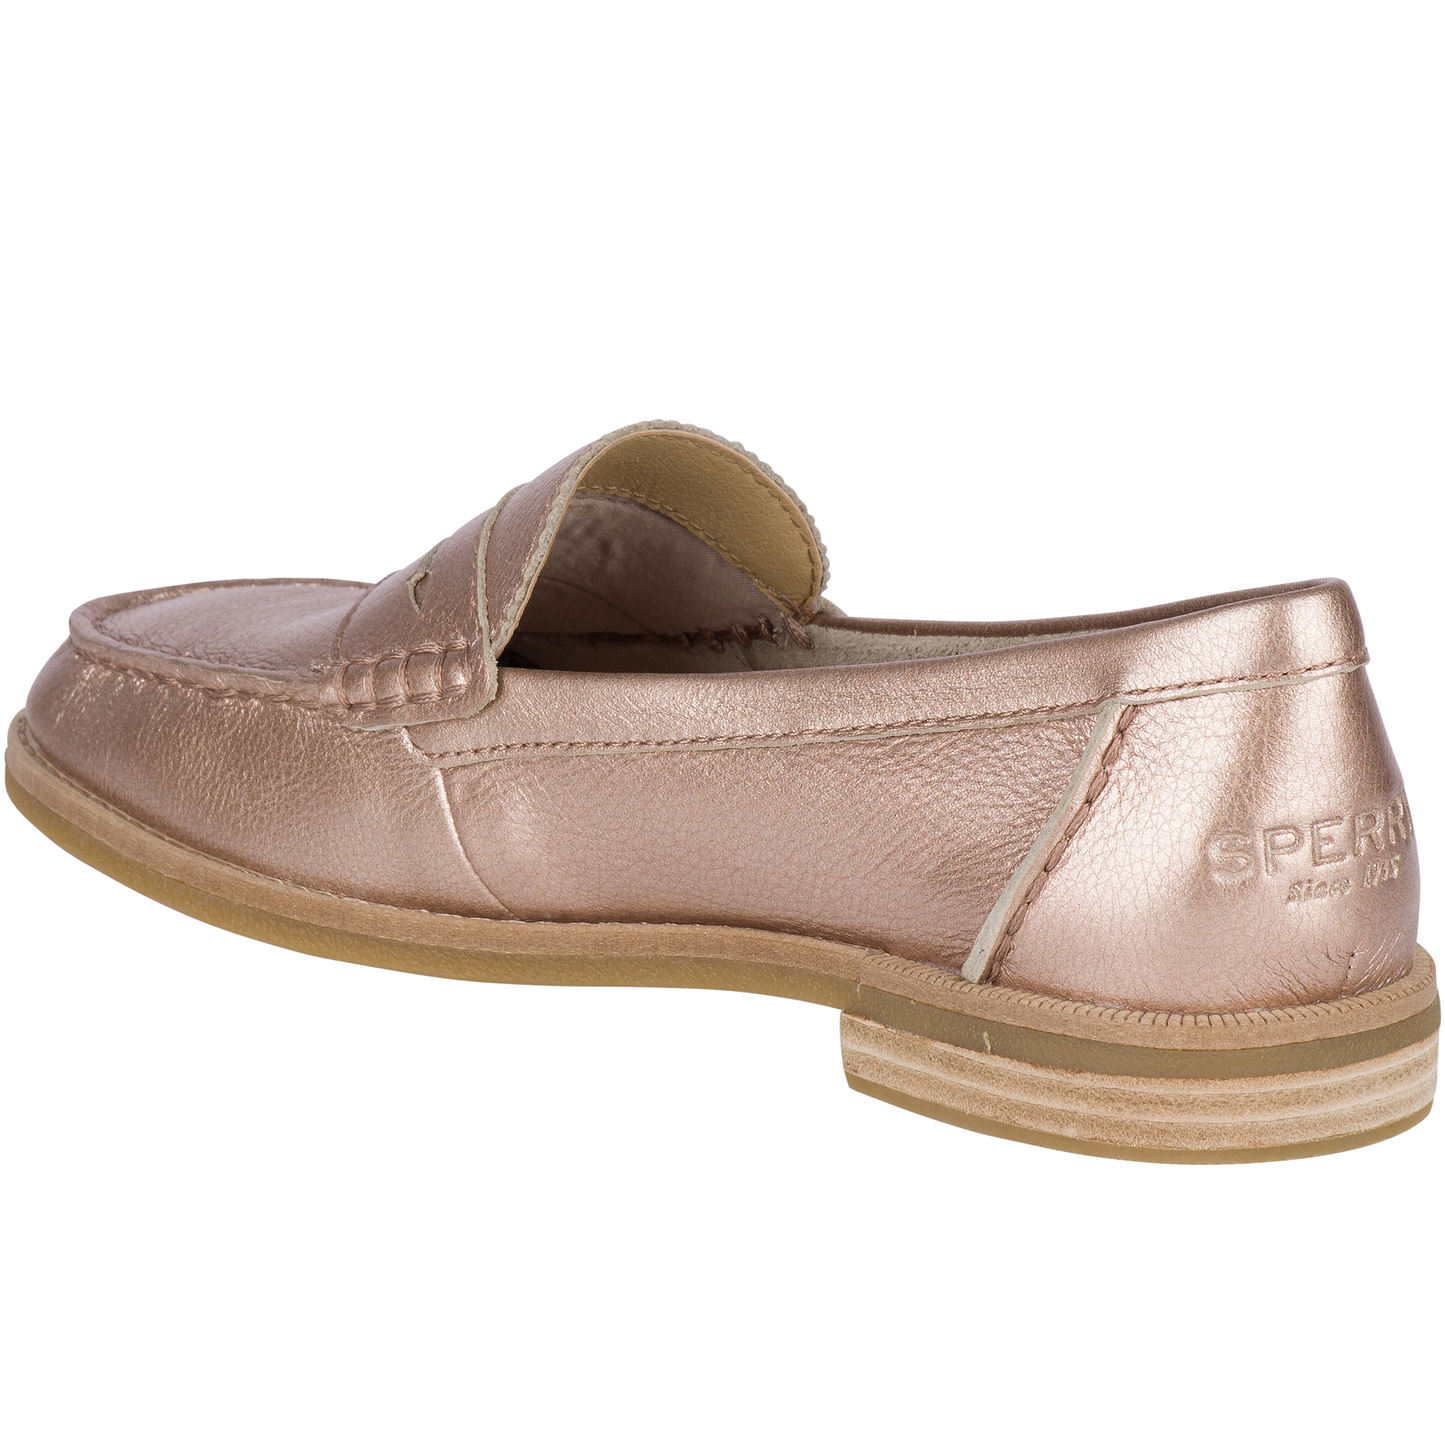 Sperry Women's Seaport Penny Loafer - Rose Gold (STS83408)